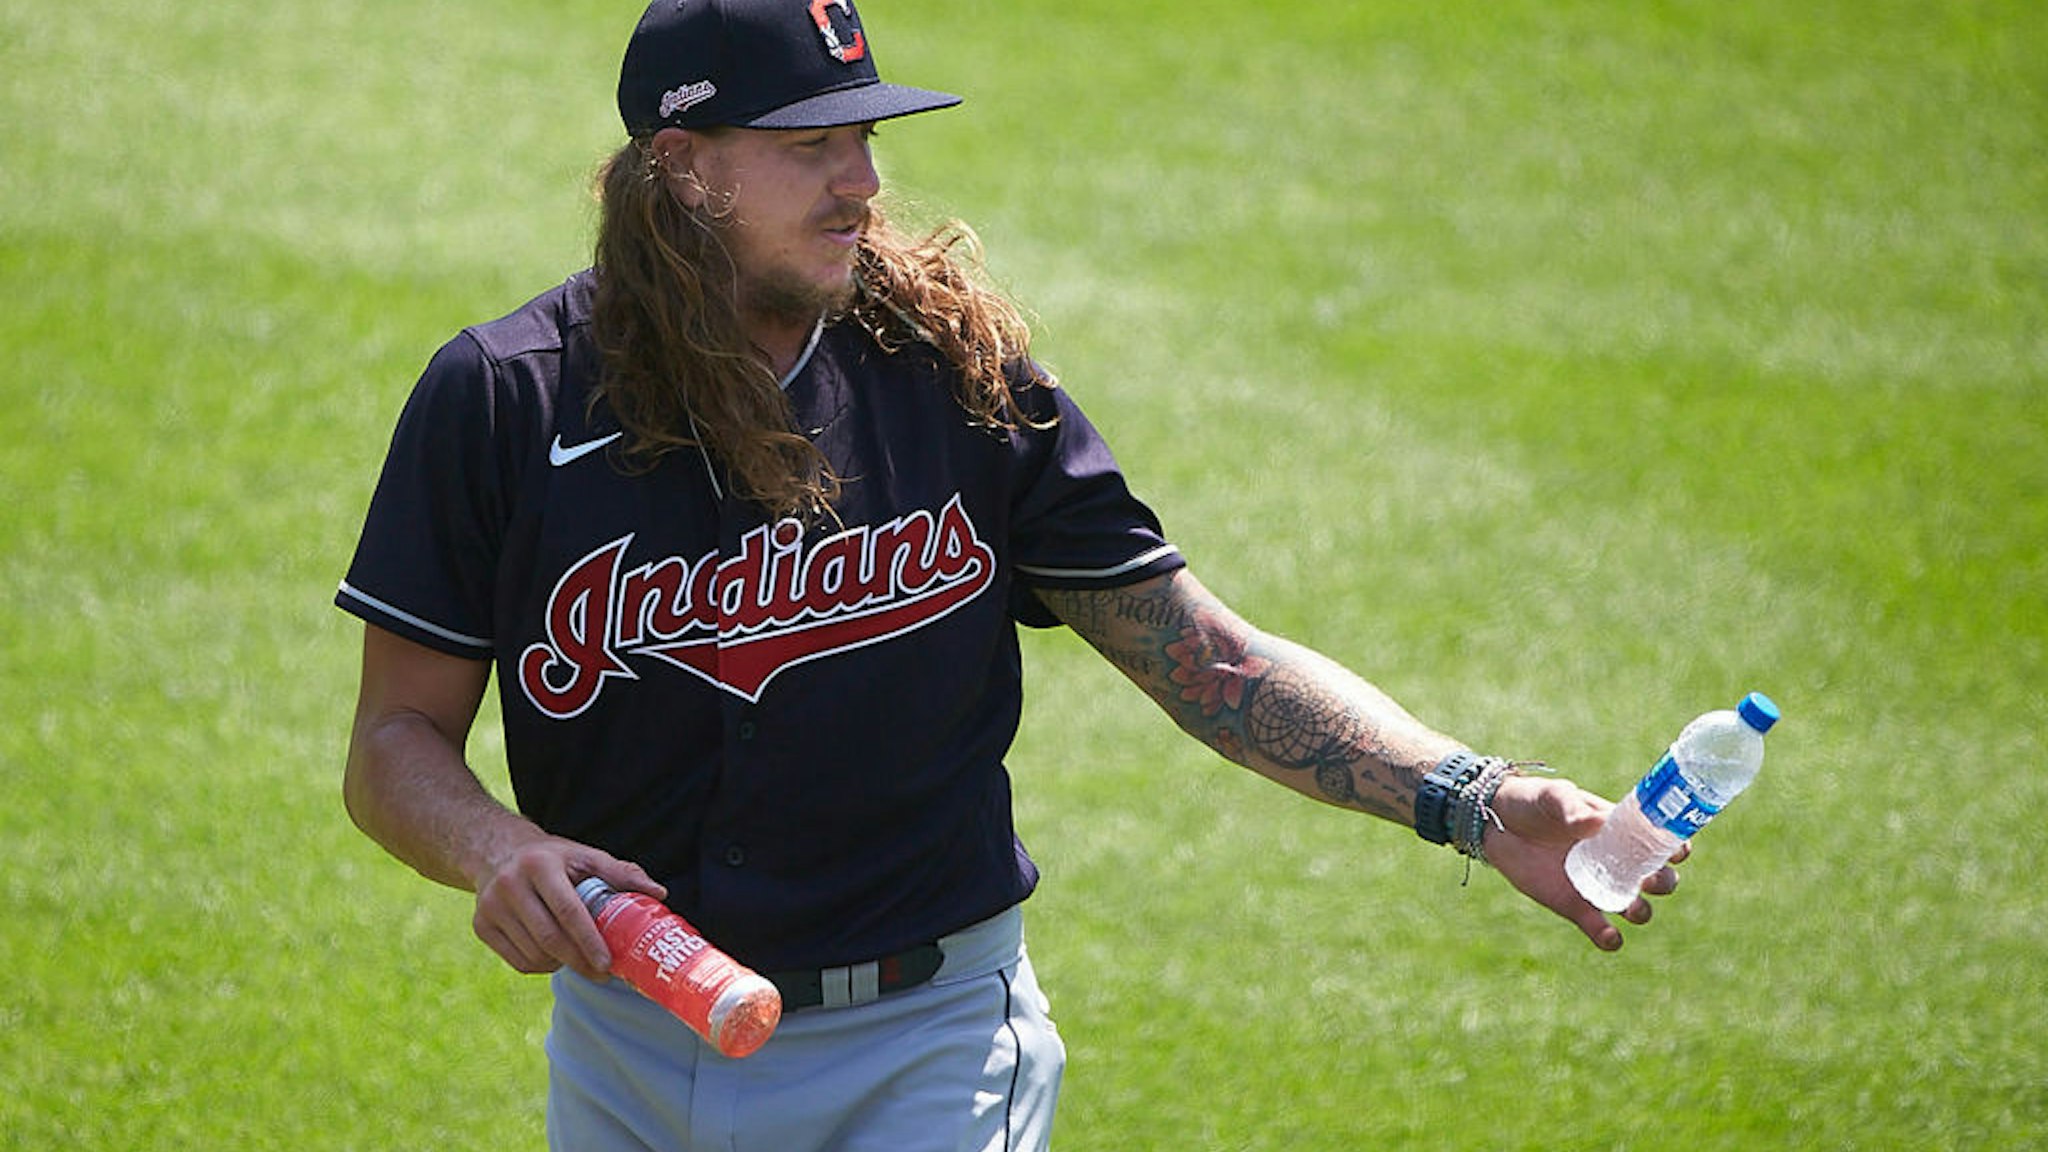 In this handout image provided by the Cleveland Indians, Mike Clevinger #52 of the Cleveland Indians walks on the field during a summer workout in preparation for a shortened MLB season due to the coronavirus (COVID-19) pandemic at Progressive Field on July 03, 2020 in Cleveland, Ohio.